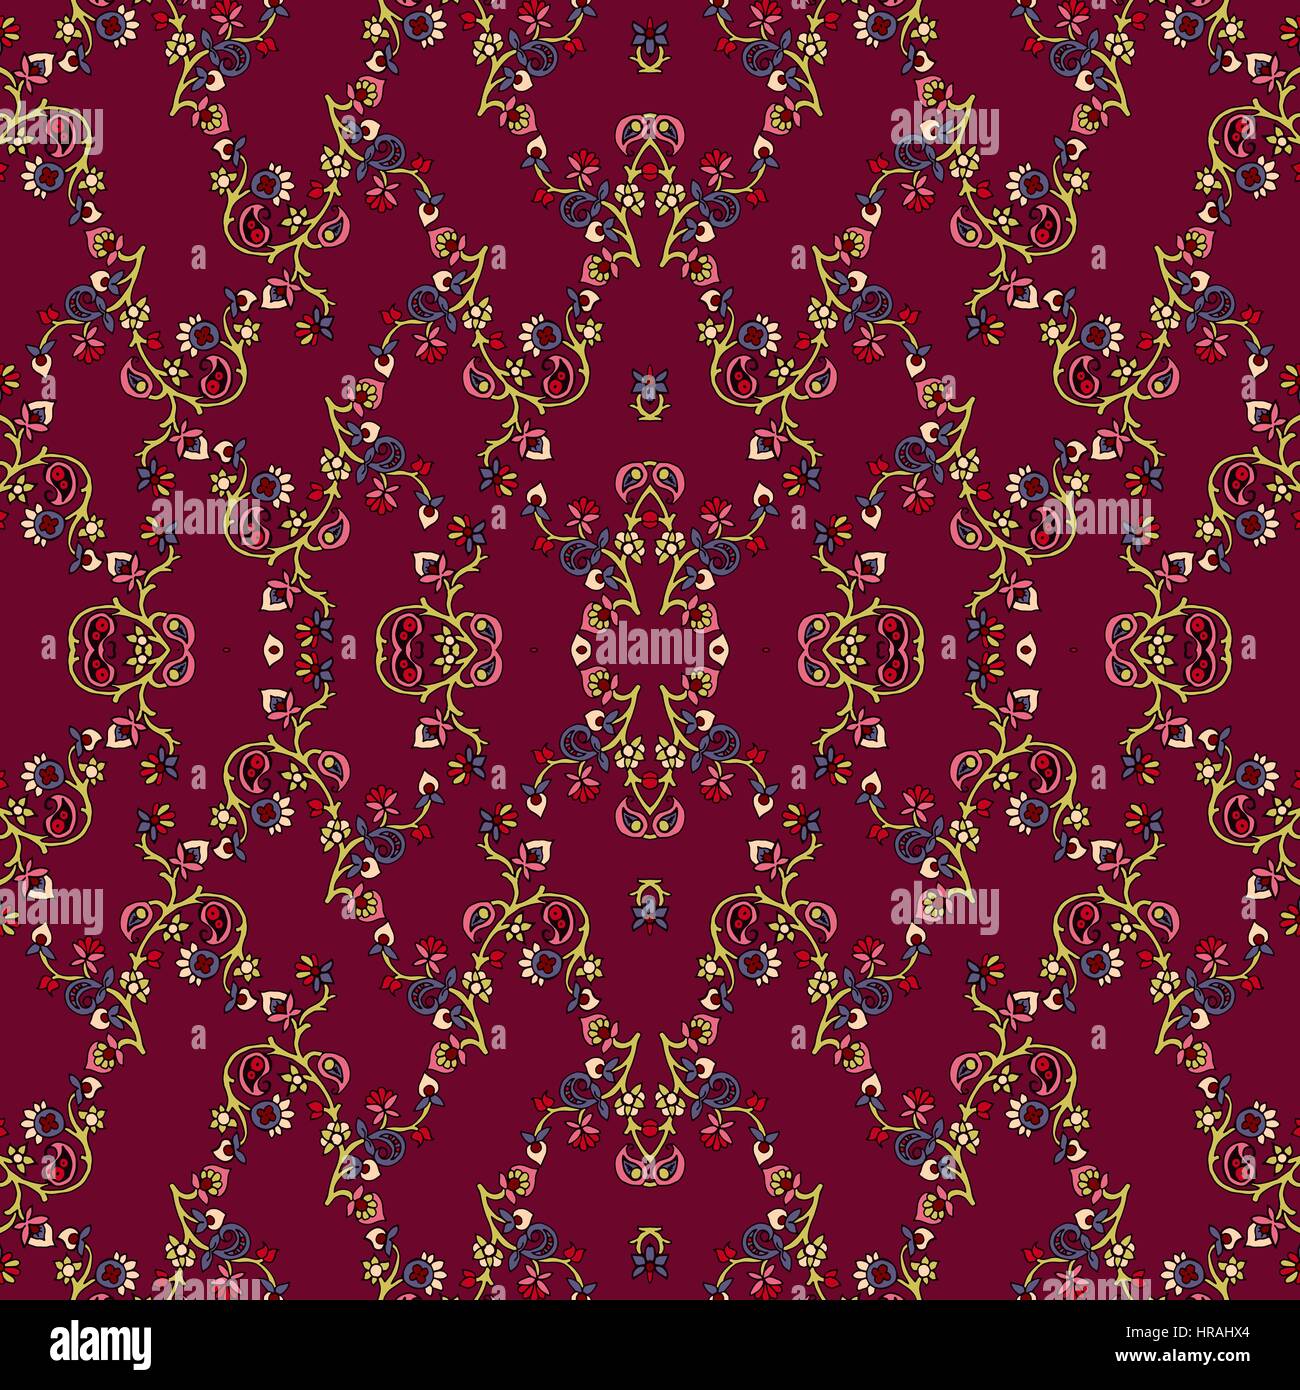 Kaleidoscope abstract geometric seamless paisley pattern. Traditional oriental ornament with blossom branches, on a burgundy red background. Textile d Stock Vector